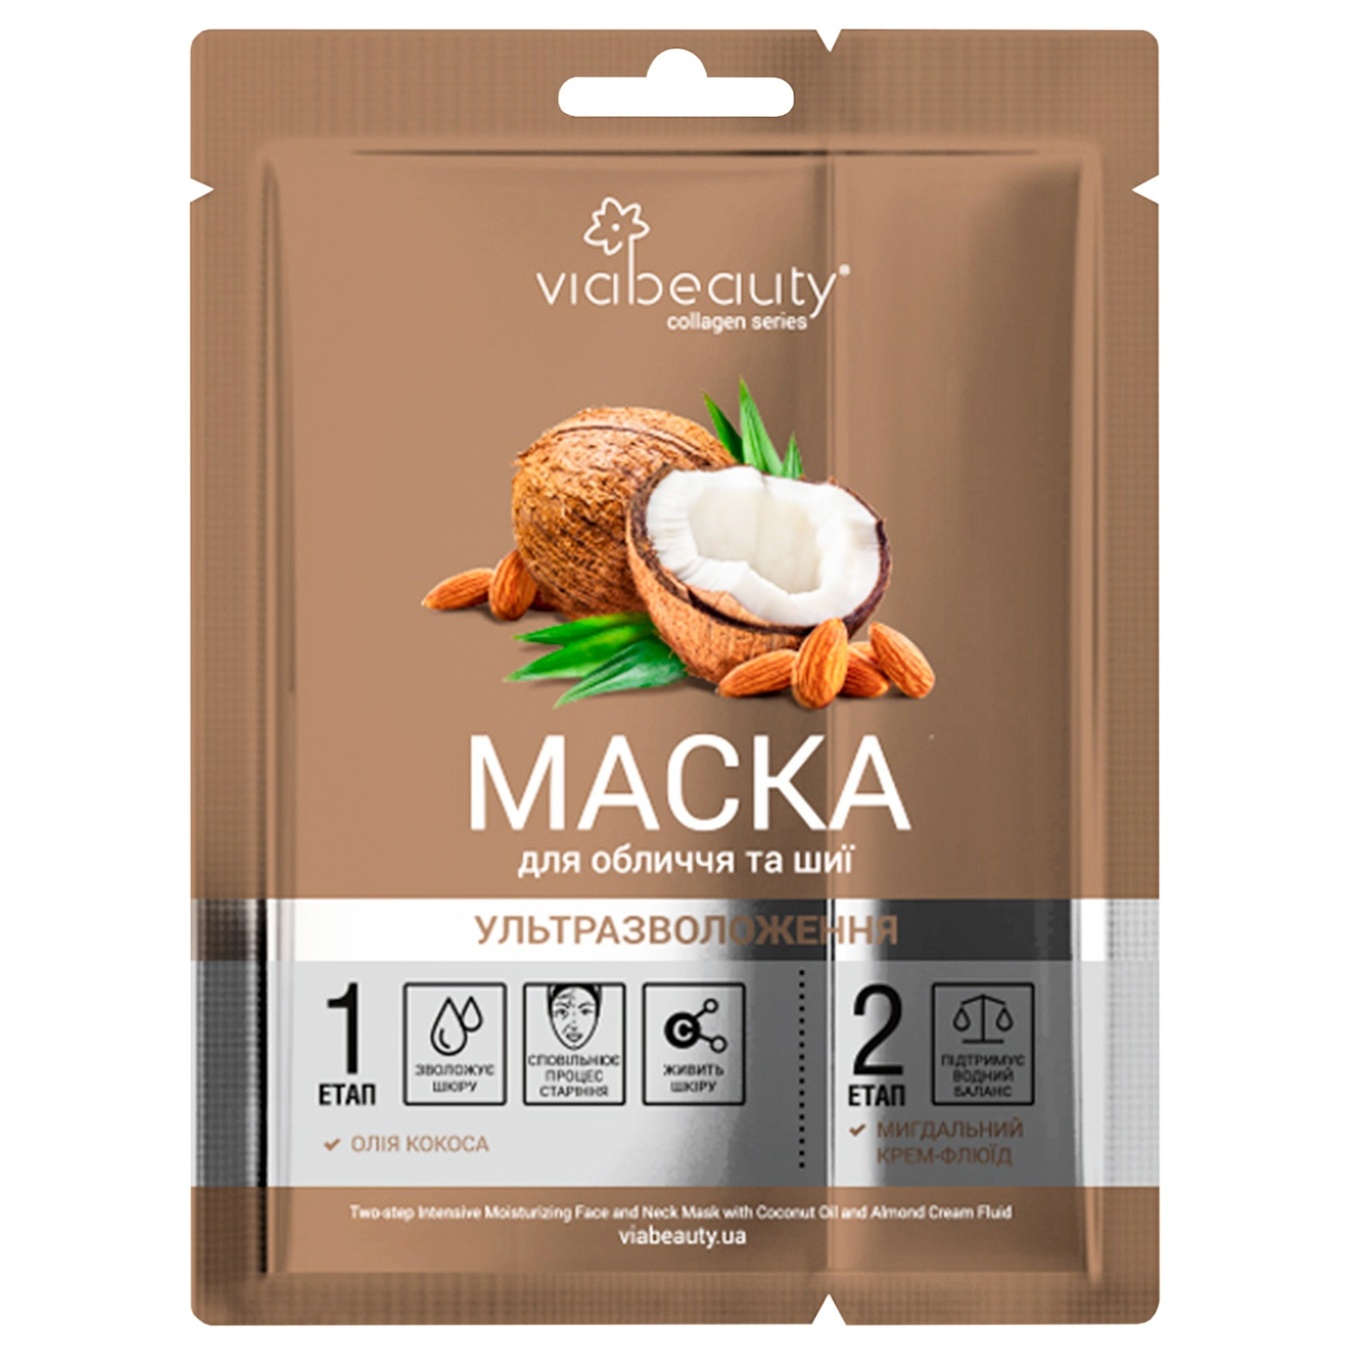 VIABEAUTY face and neck ultra-moisturizing mask with coconut oil and almond cream-fluid